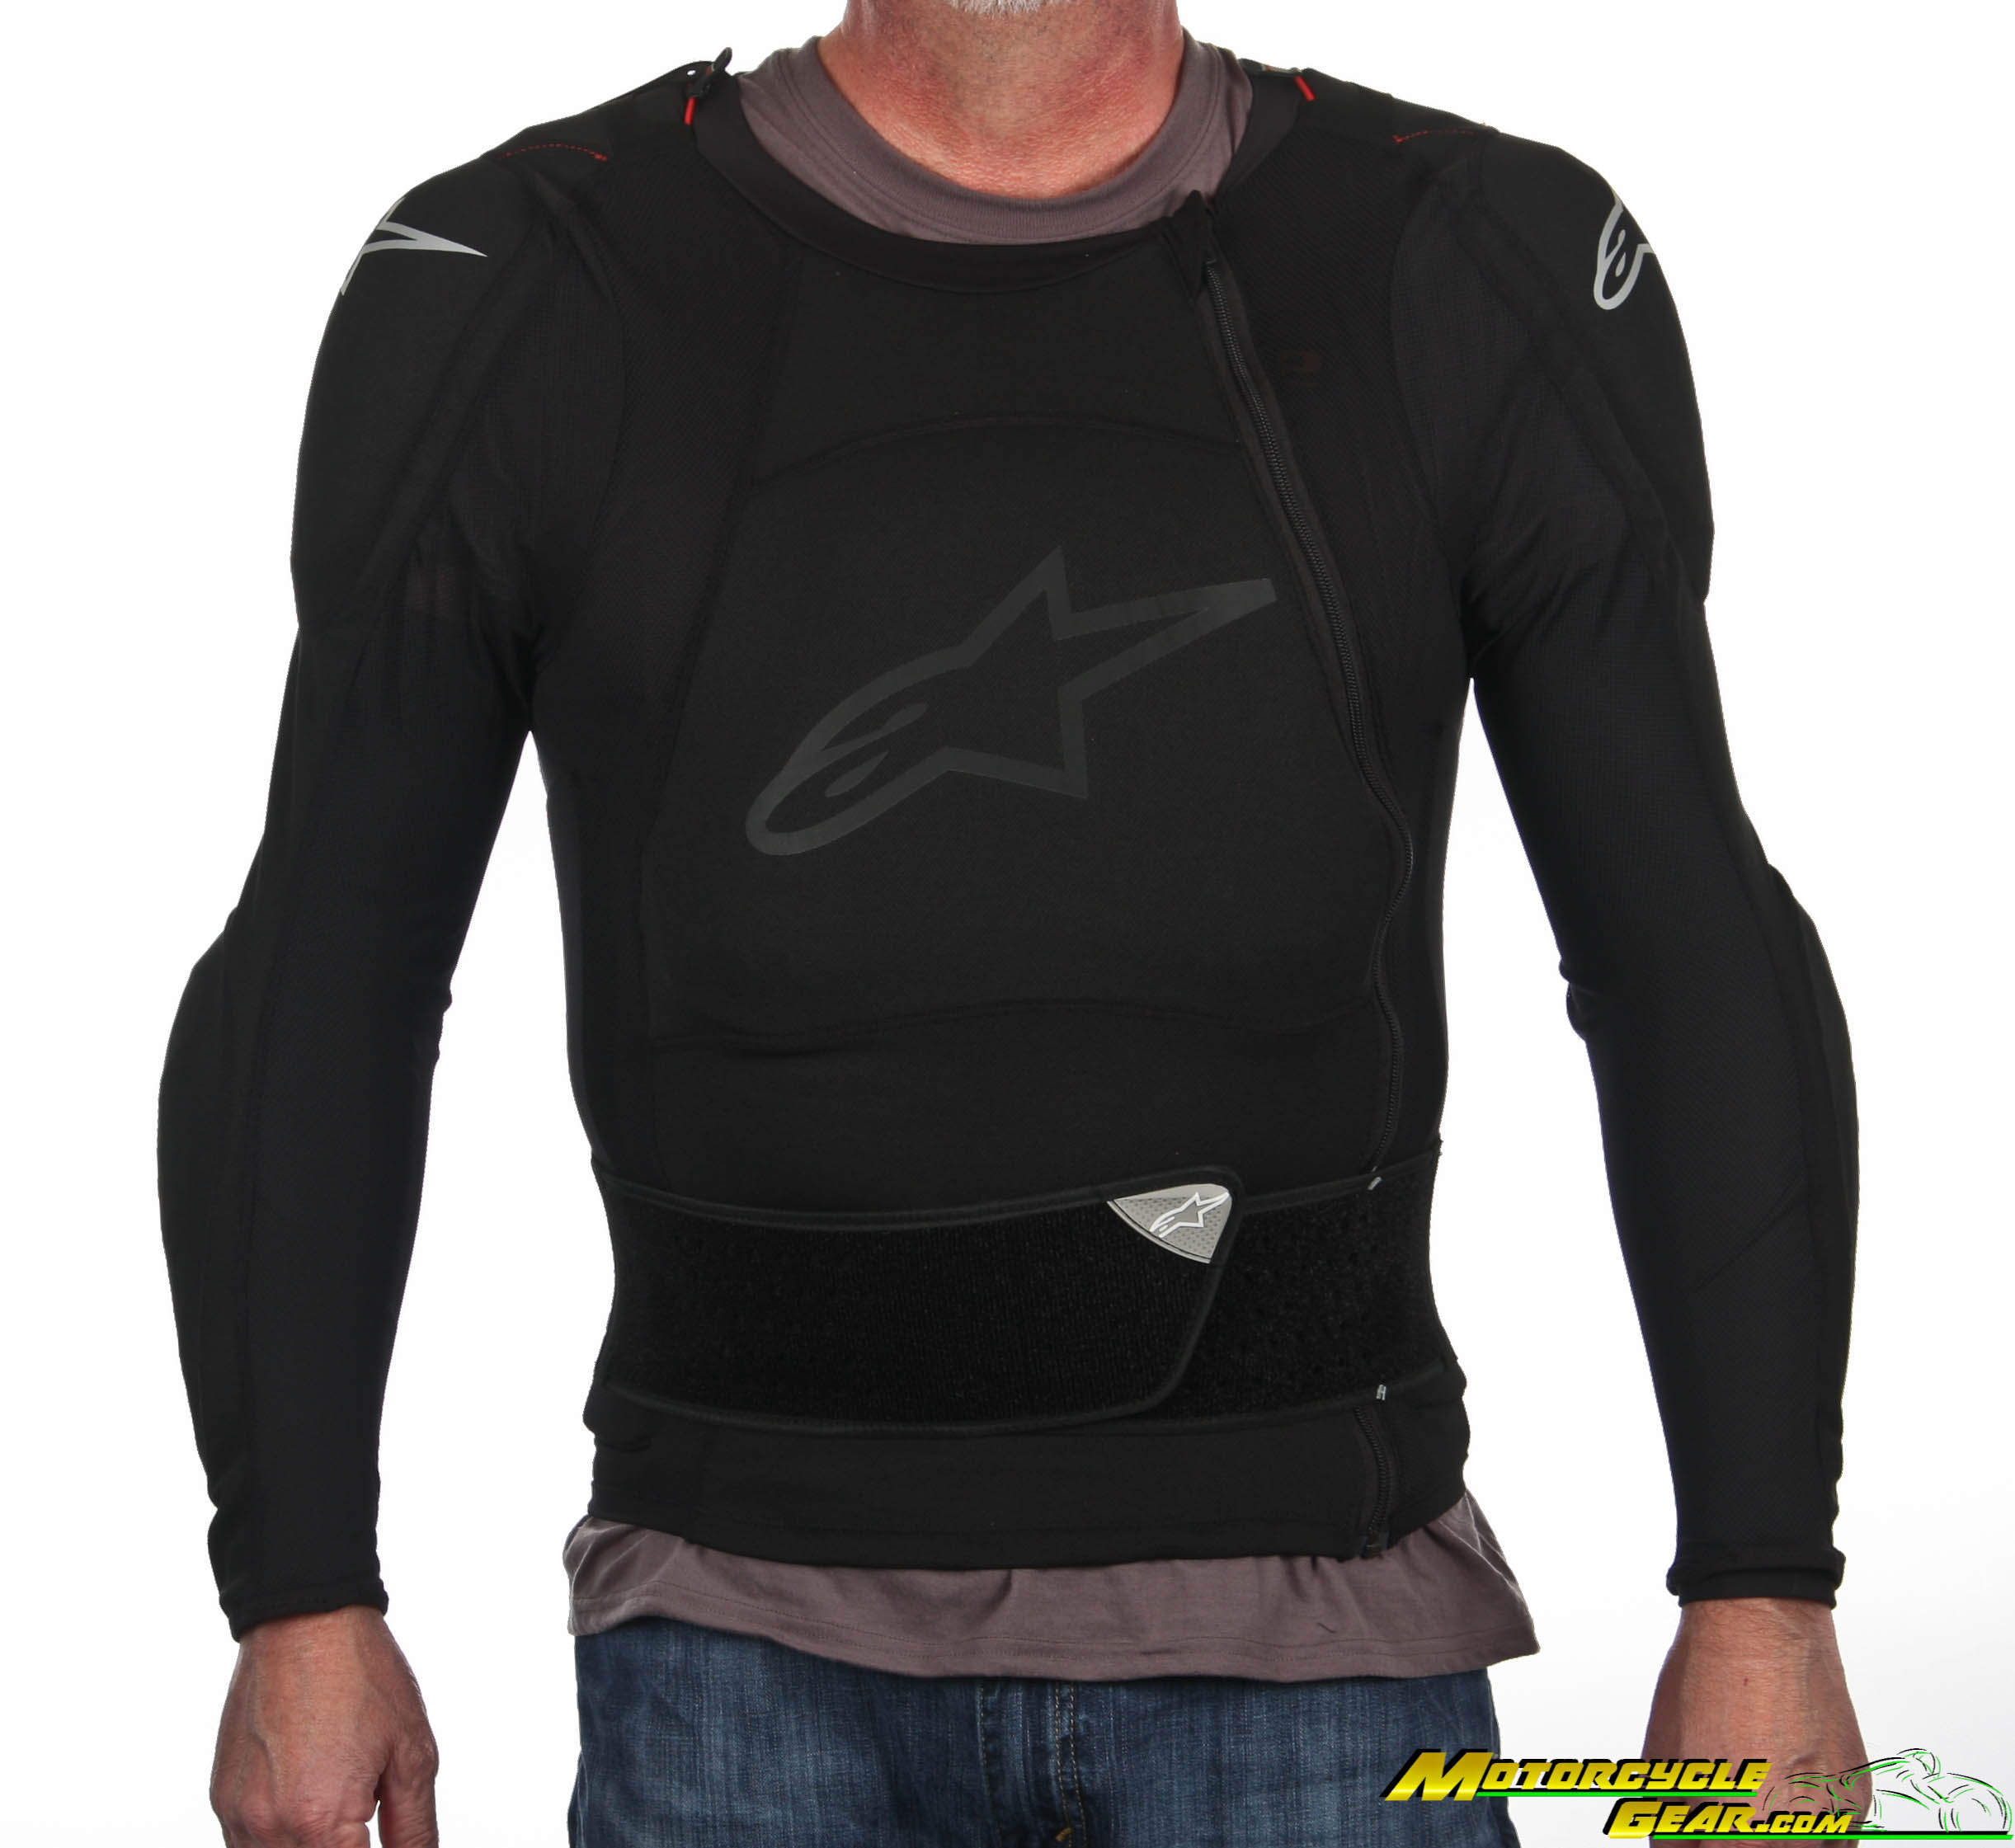 Viewing Images For Alpinestars Sequence Protection Long Sleeve Jacket :: MotorcycleGear.com